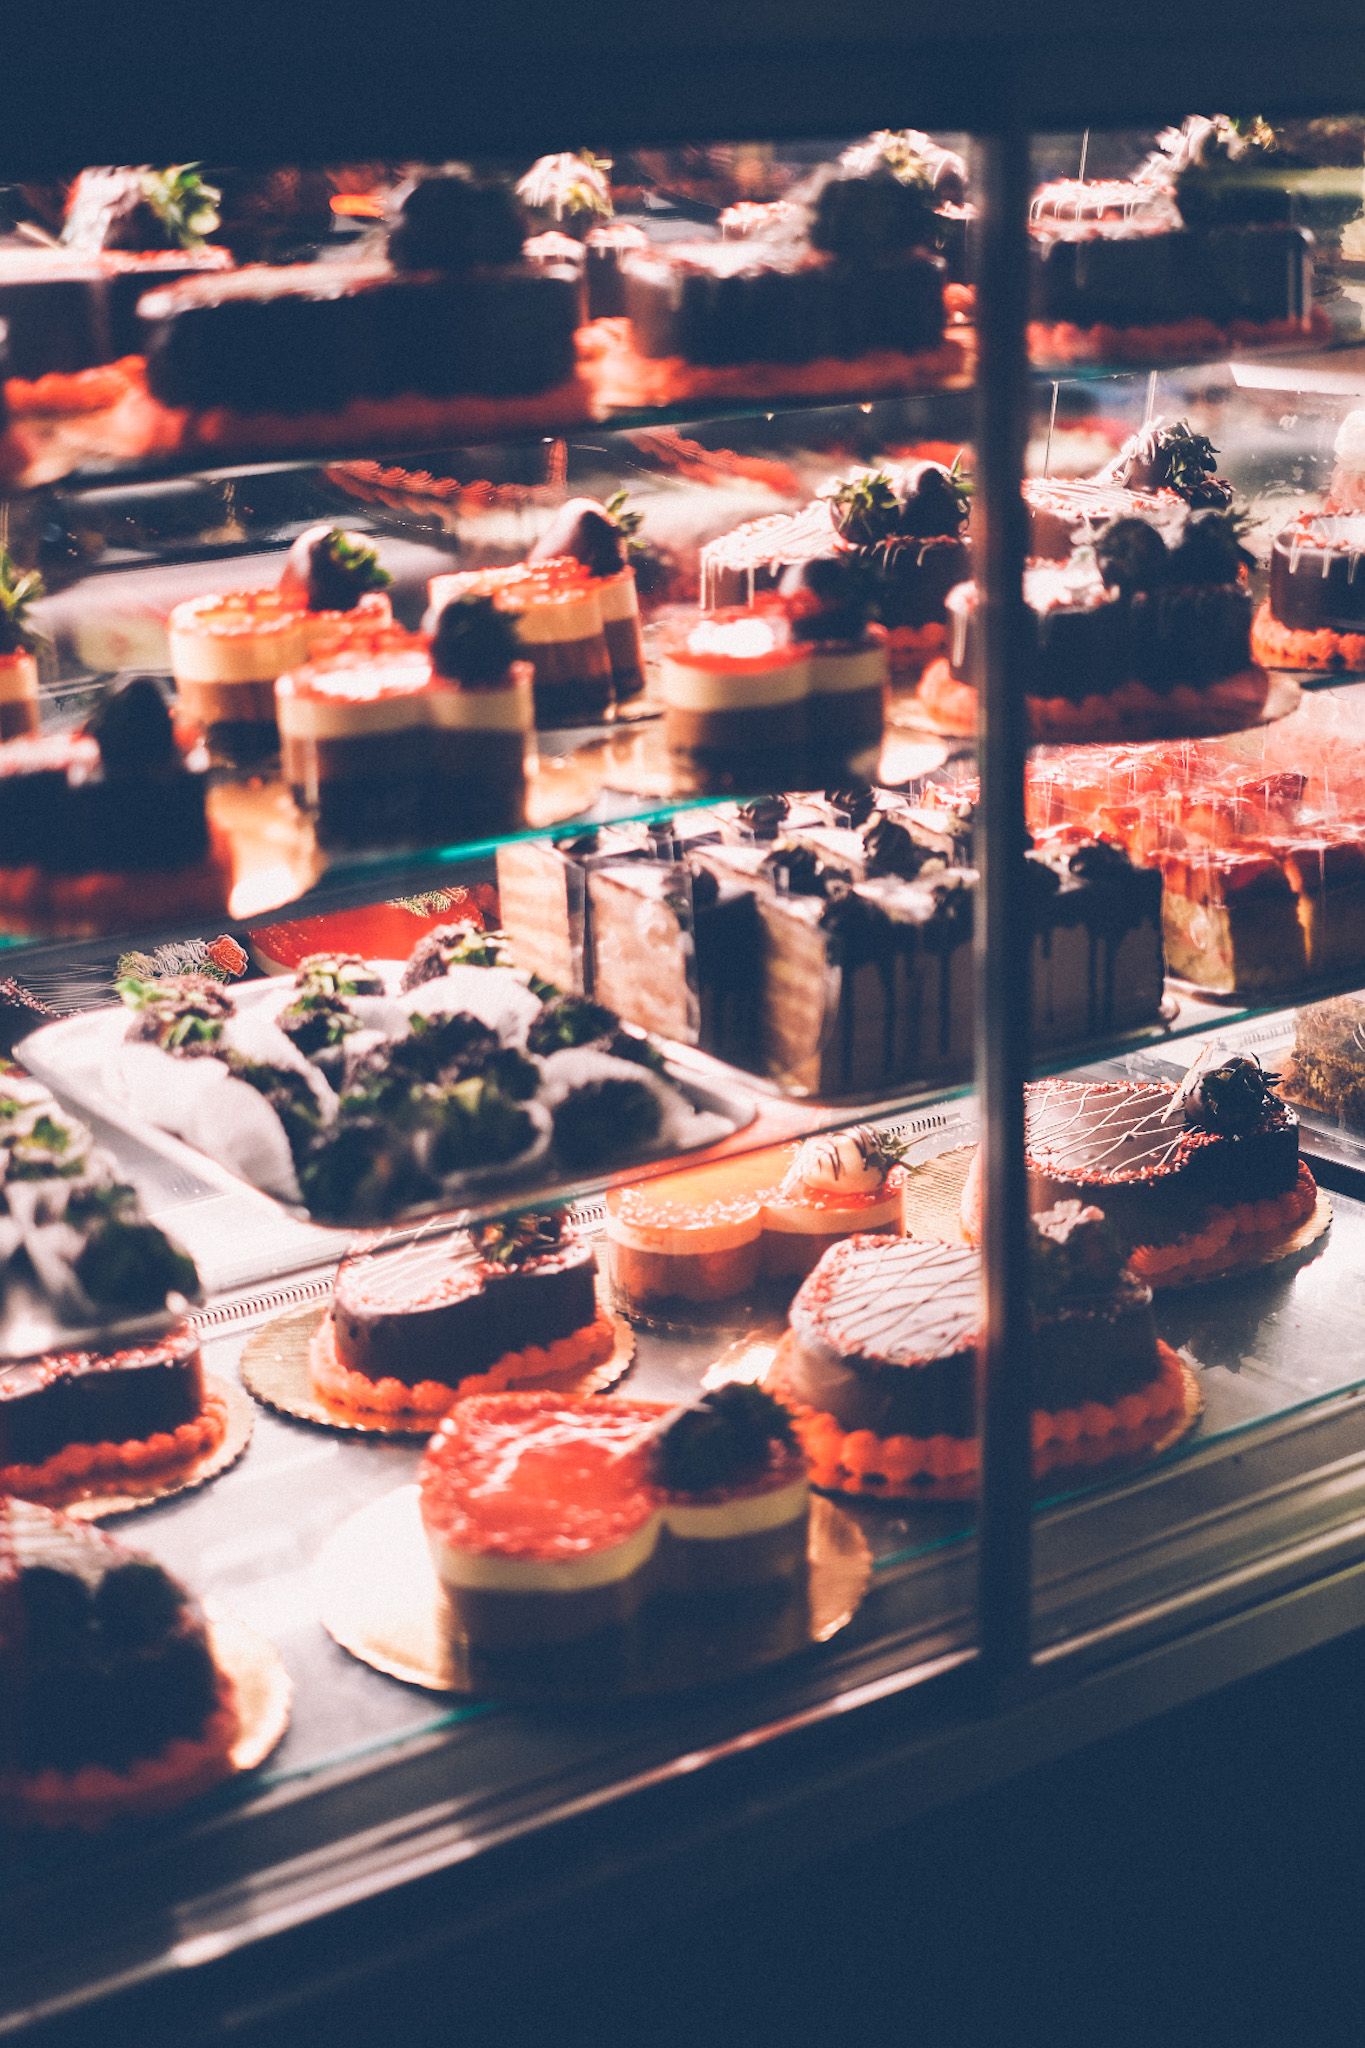 Dozens of small and large heart-shaped cakes and other sweet treats of various flavors sit in a display case, decorated with chocolate and strawberries.